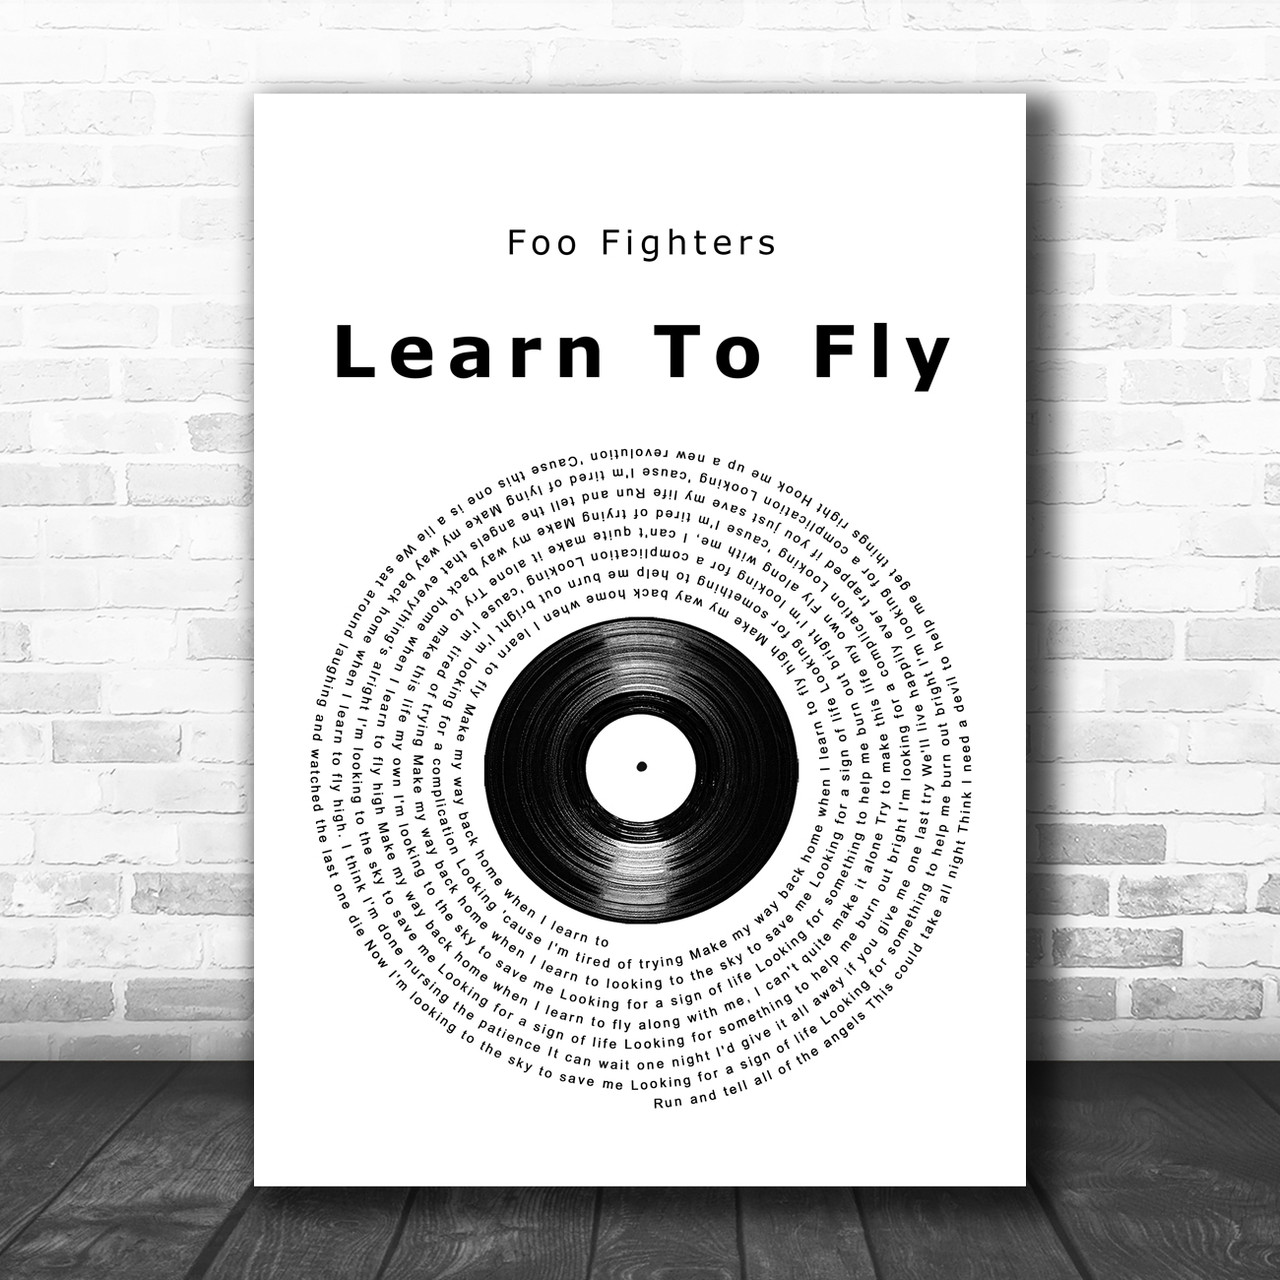 Home, Learn 2 Fly